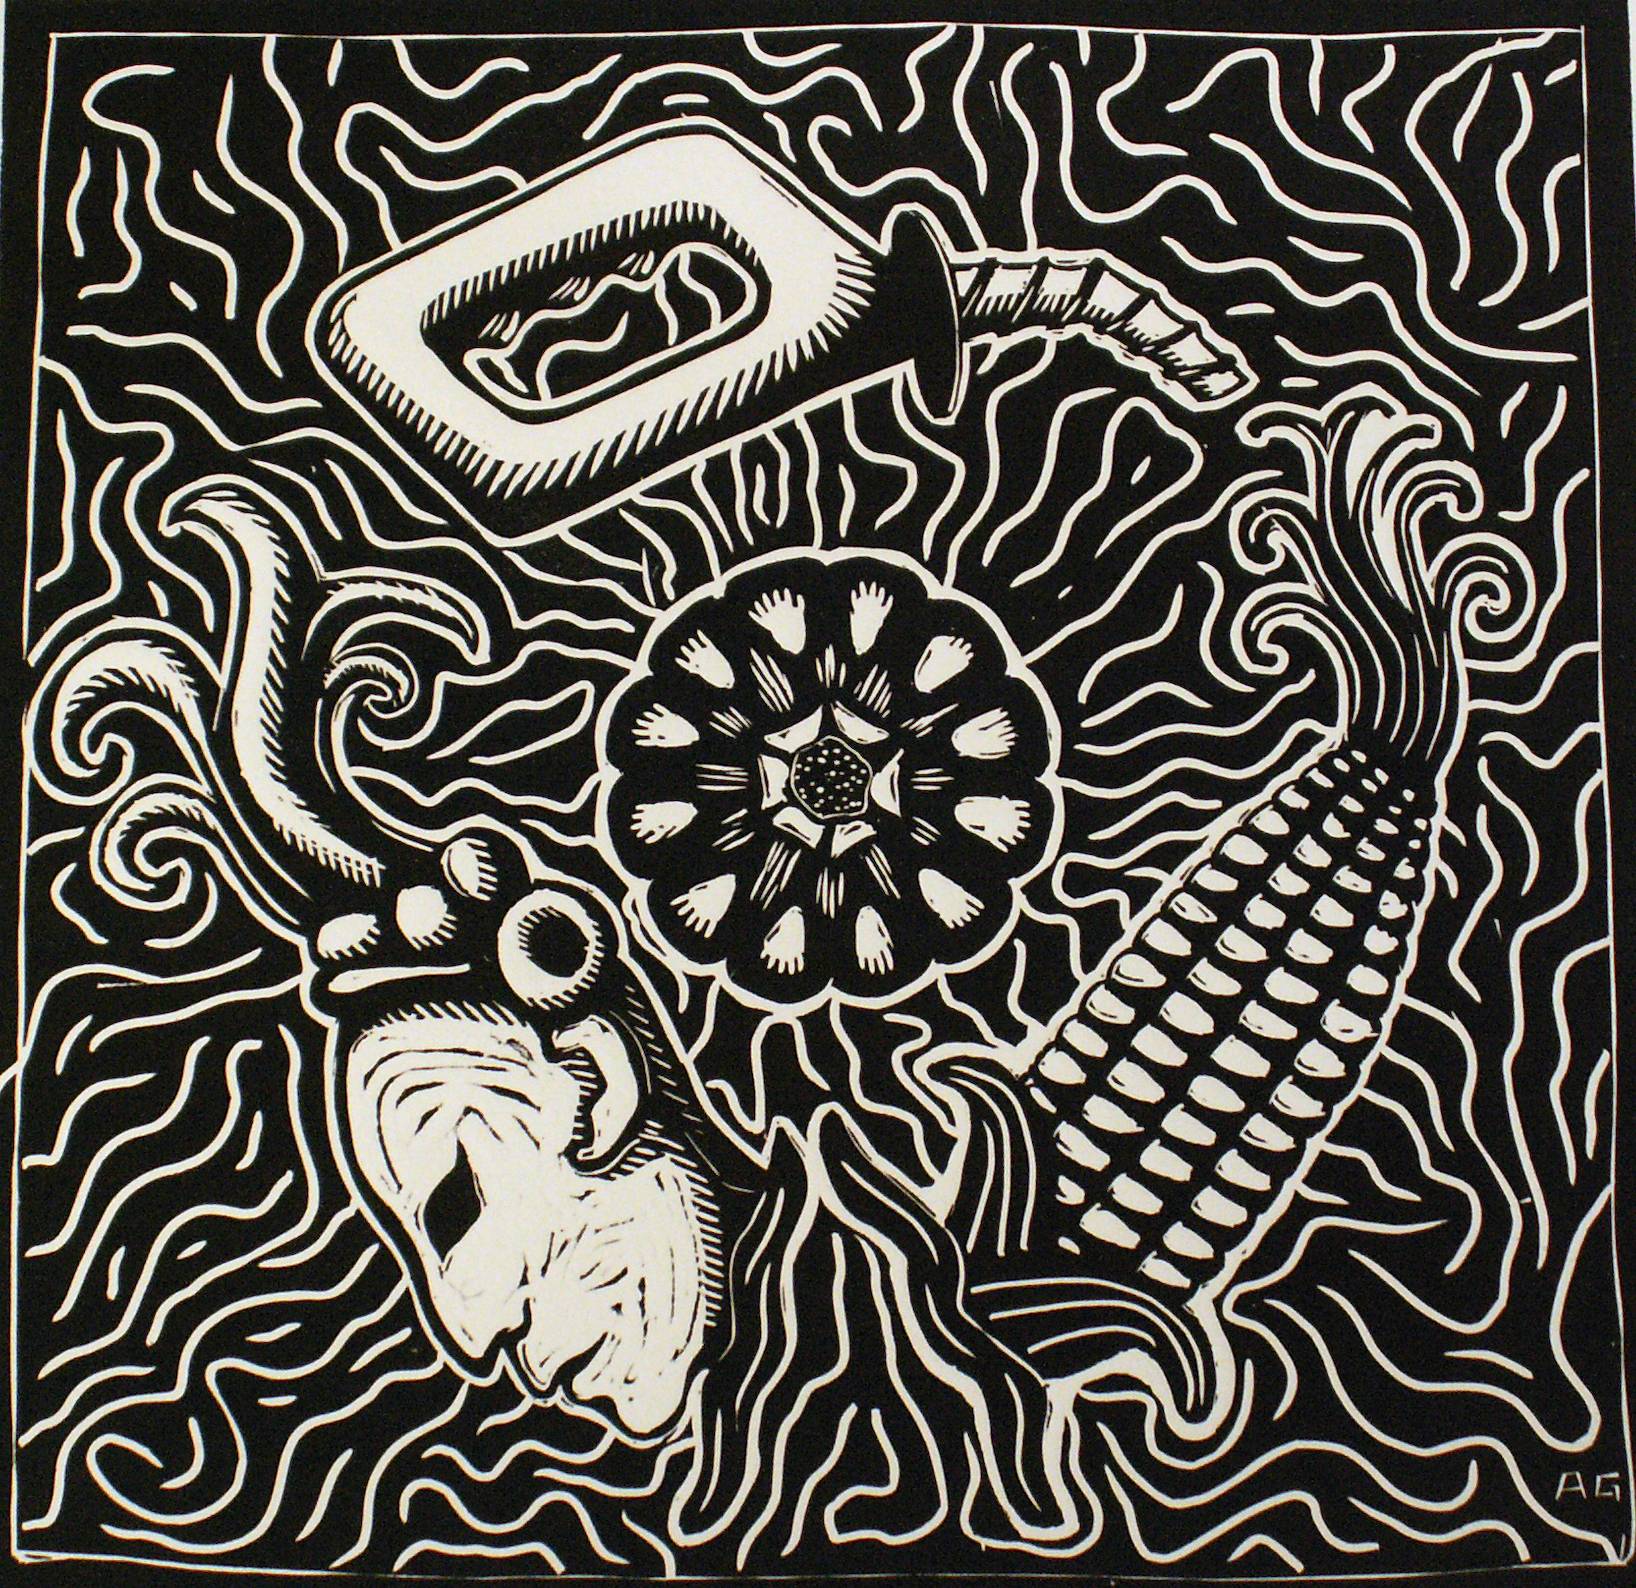 linocut print of an ear of corn, a gas pump handle, and an indigenous mask